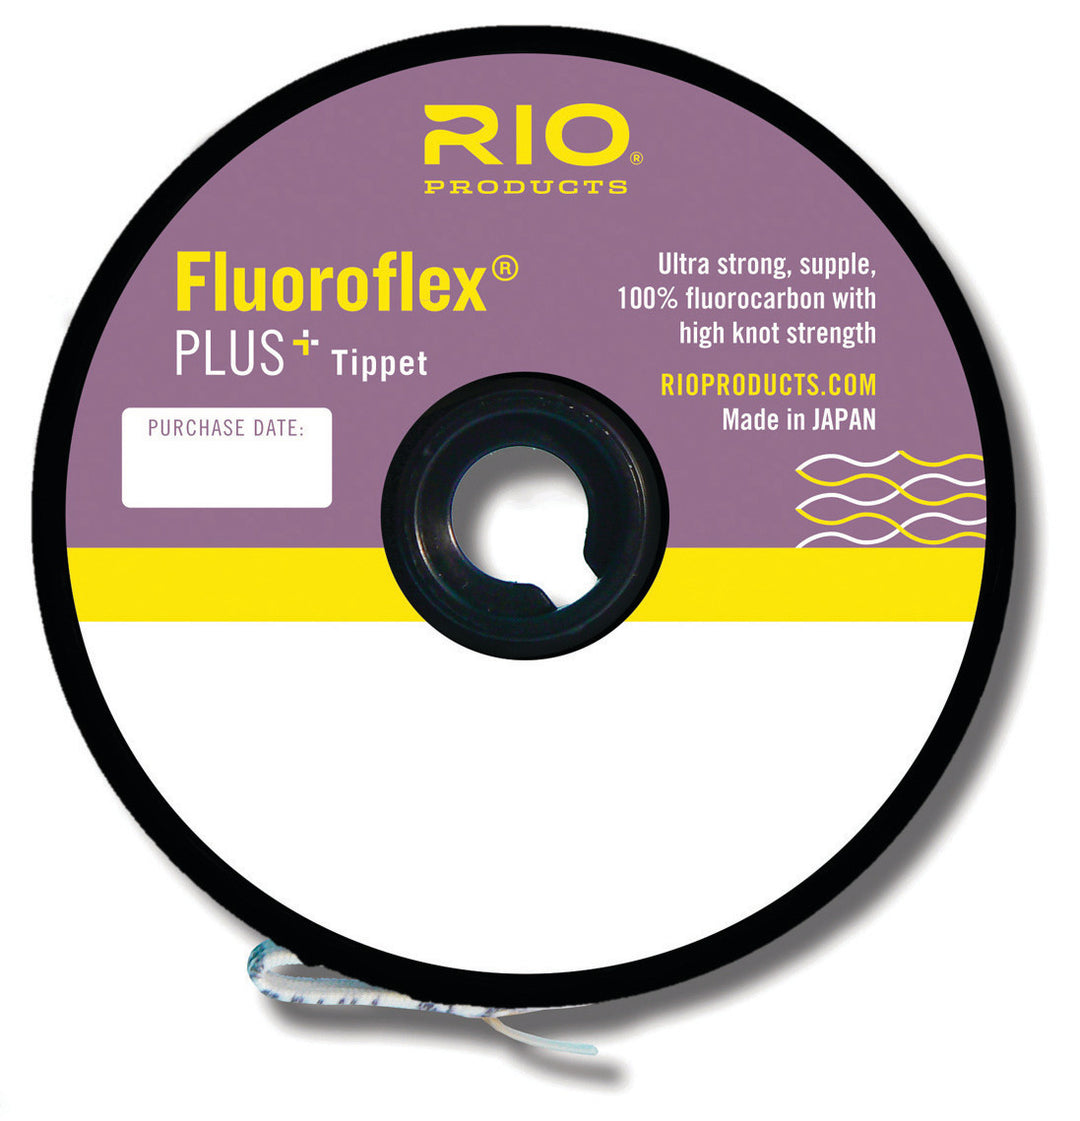 Rio Fluoroflex PLUS (2x-6x) - Strongest and Thinnest Fluorocarbon with Incredible Strength - Nearly Invisible to Fish - Supple and Knot-Friendly - High Knot Strength - 100% Fluorocarbon